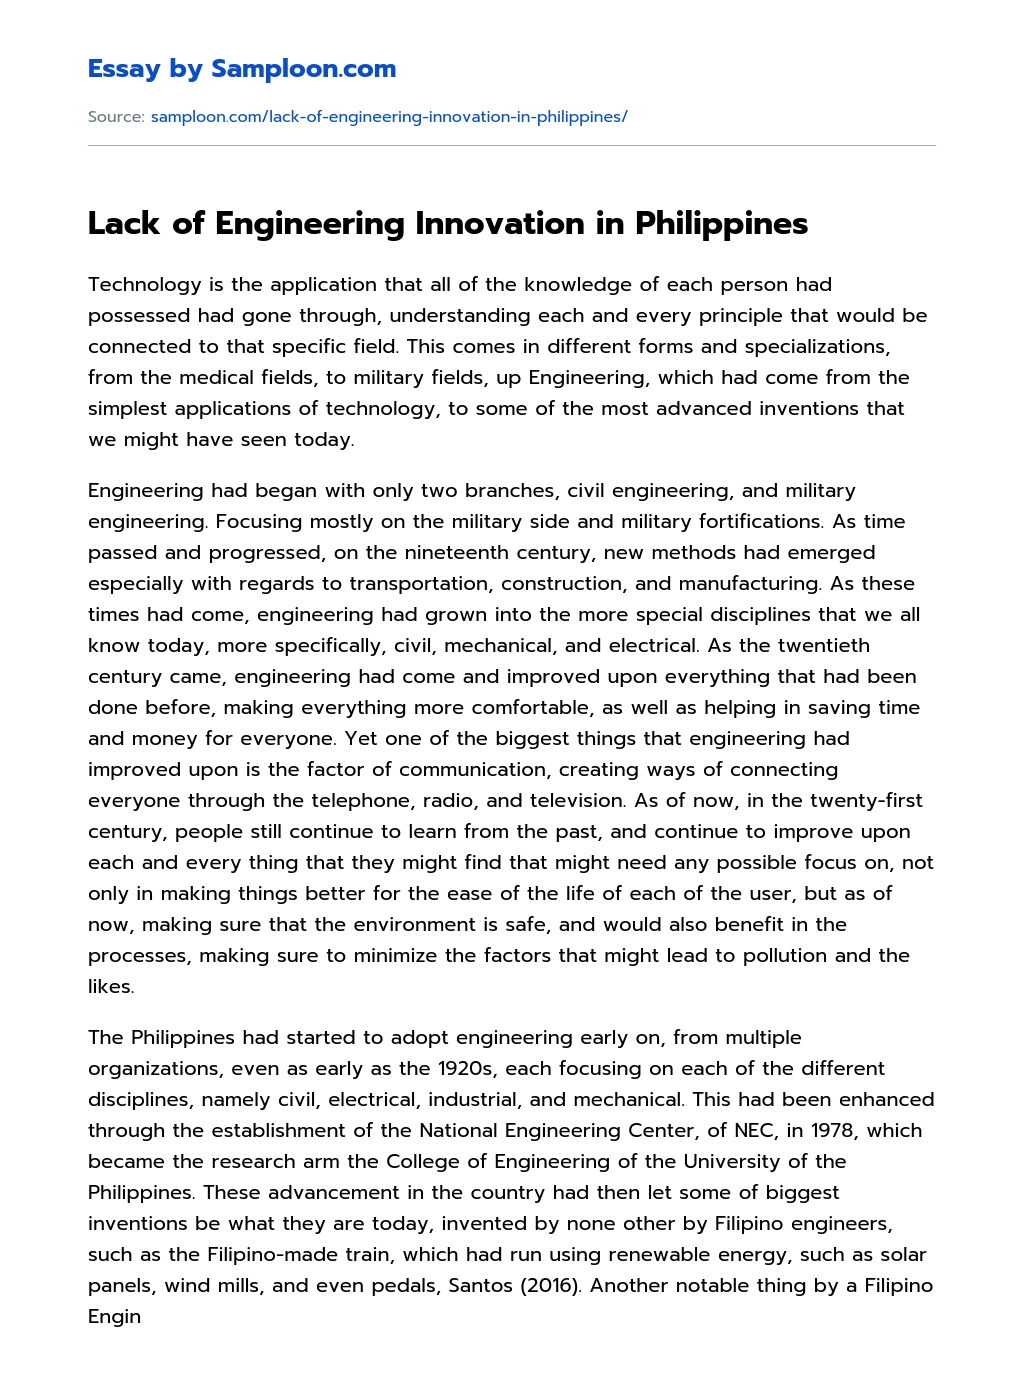 Lack of Engineering Innovation in Philippines essay